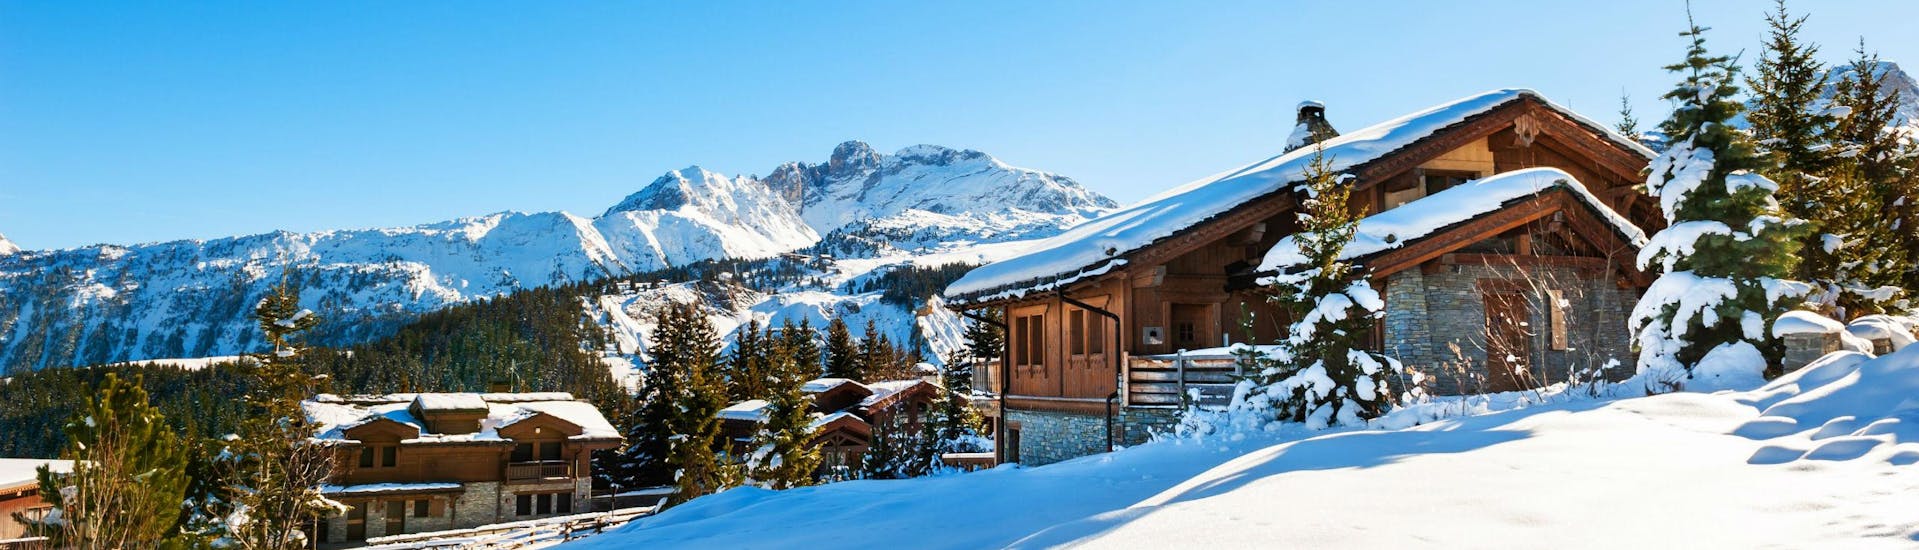 An image of a couple of snow-covered mountain huts in the popular French ski resort of Courchevel, where visitors can learn to ski in one of the many ski lessons organised by the local ski schools.